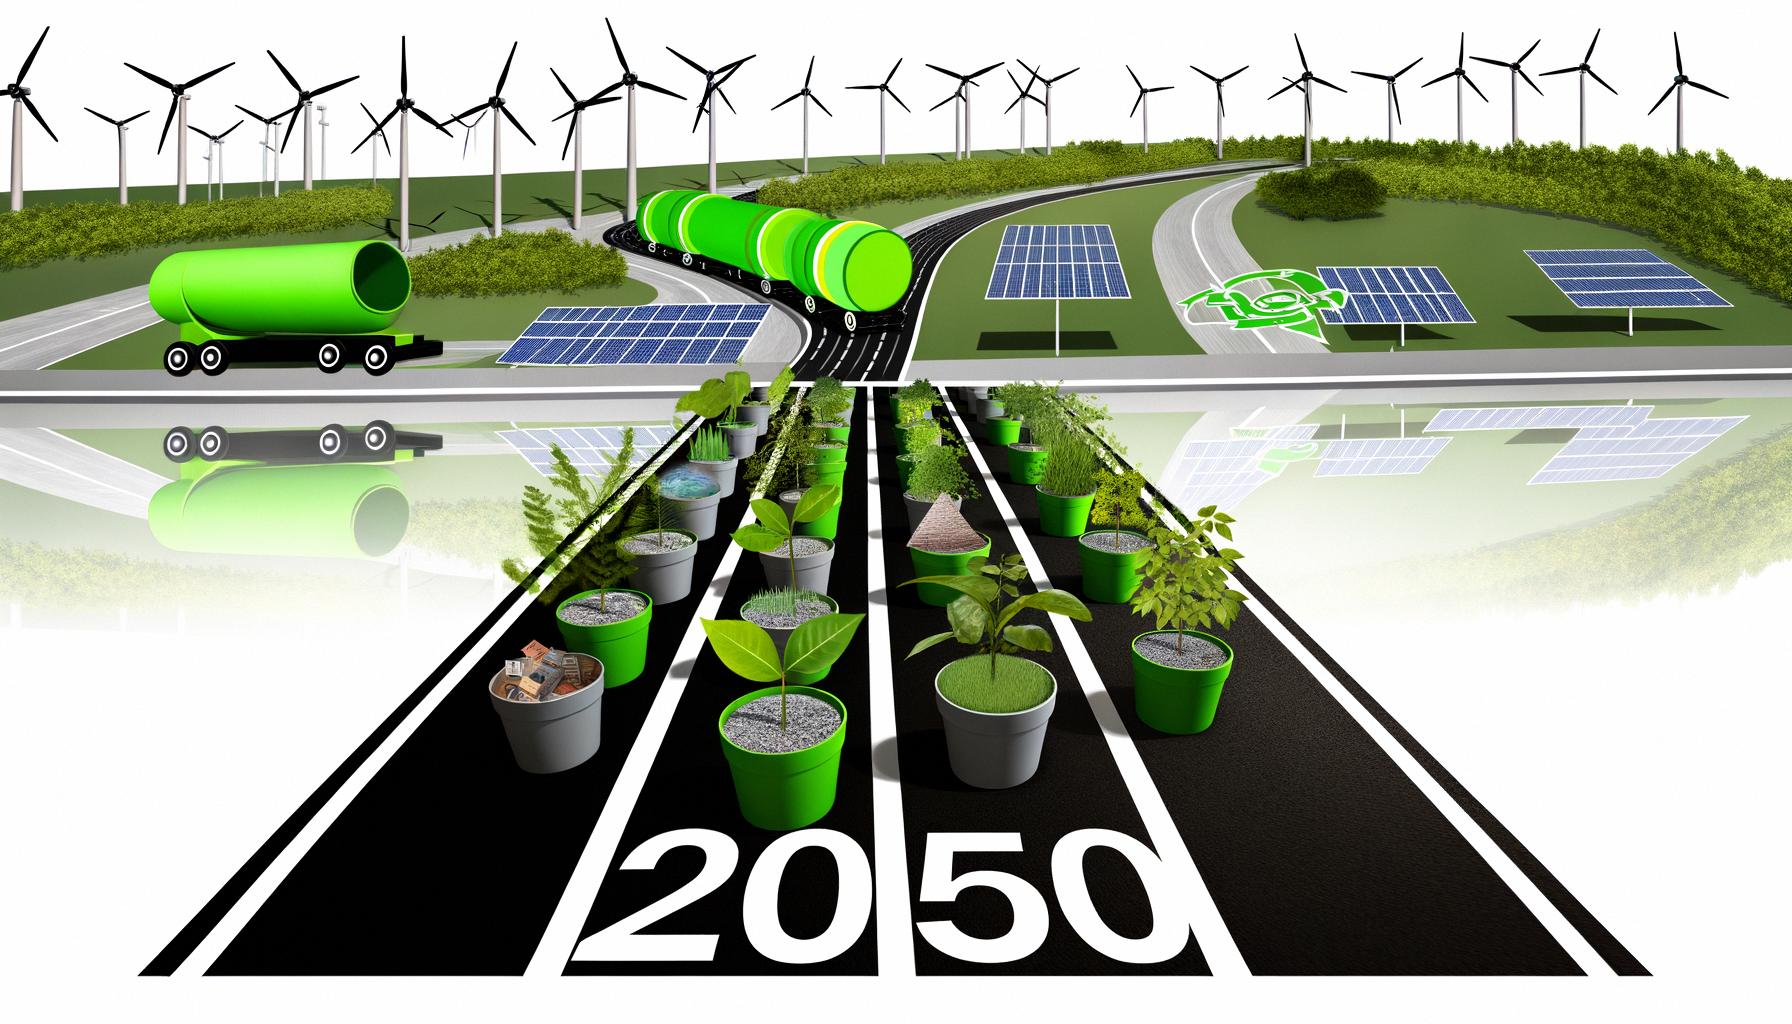 Multiple sectors focusing on achieving carbon neutrality by 2050 through diverse strategies.